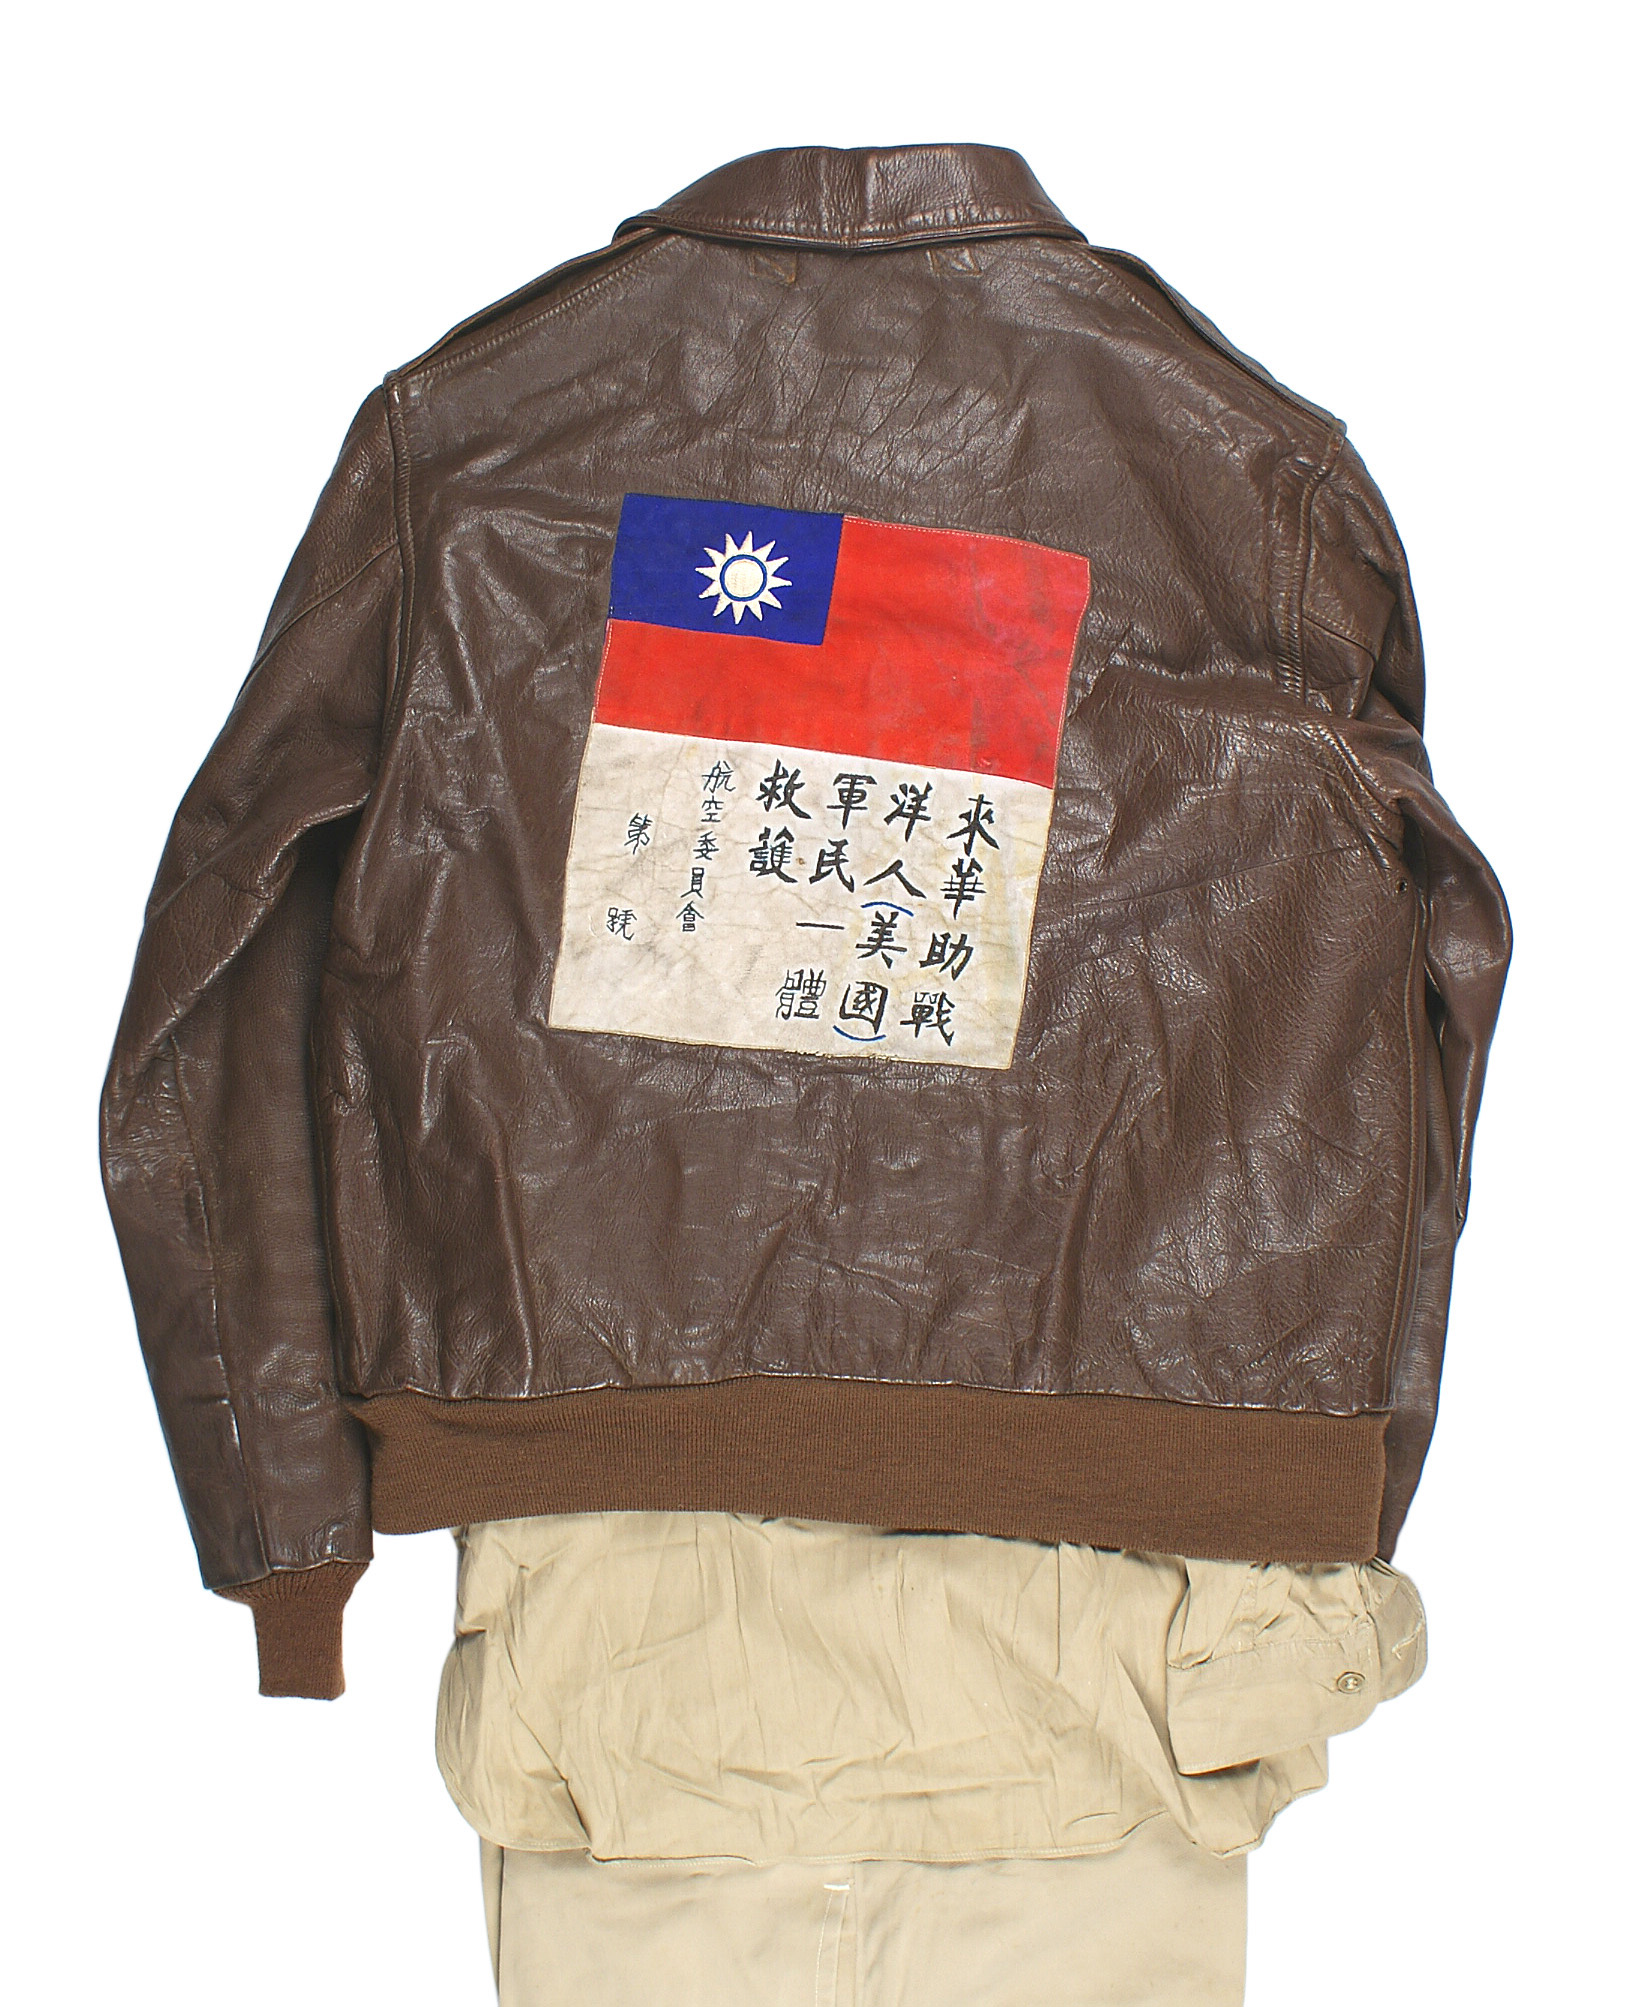 Items pertaining to 1st Lt. Cline E. Mason, who served with the Army Air Force in the CBI Theater of Operations, included his full uniform and leather jacket. Price realized: $2,440.